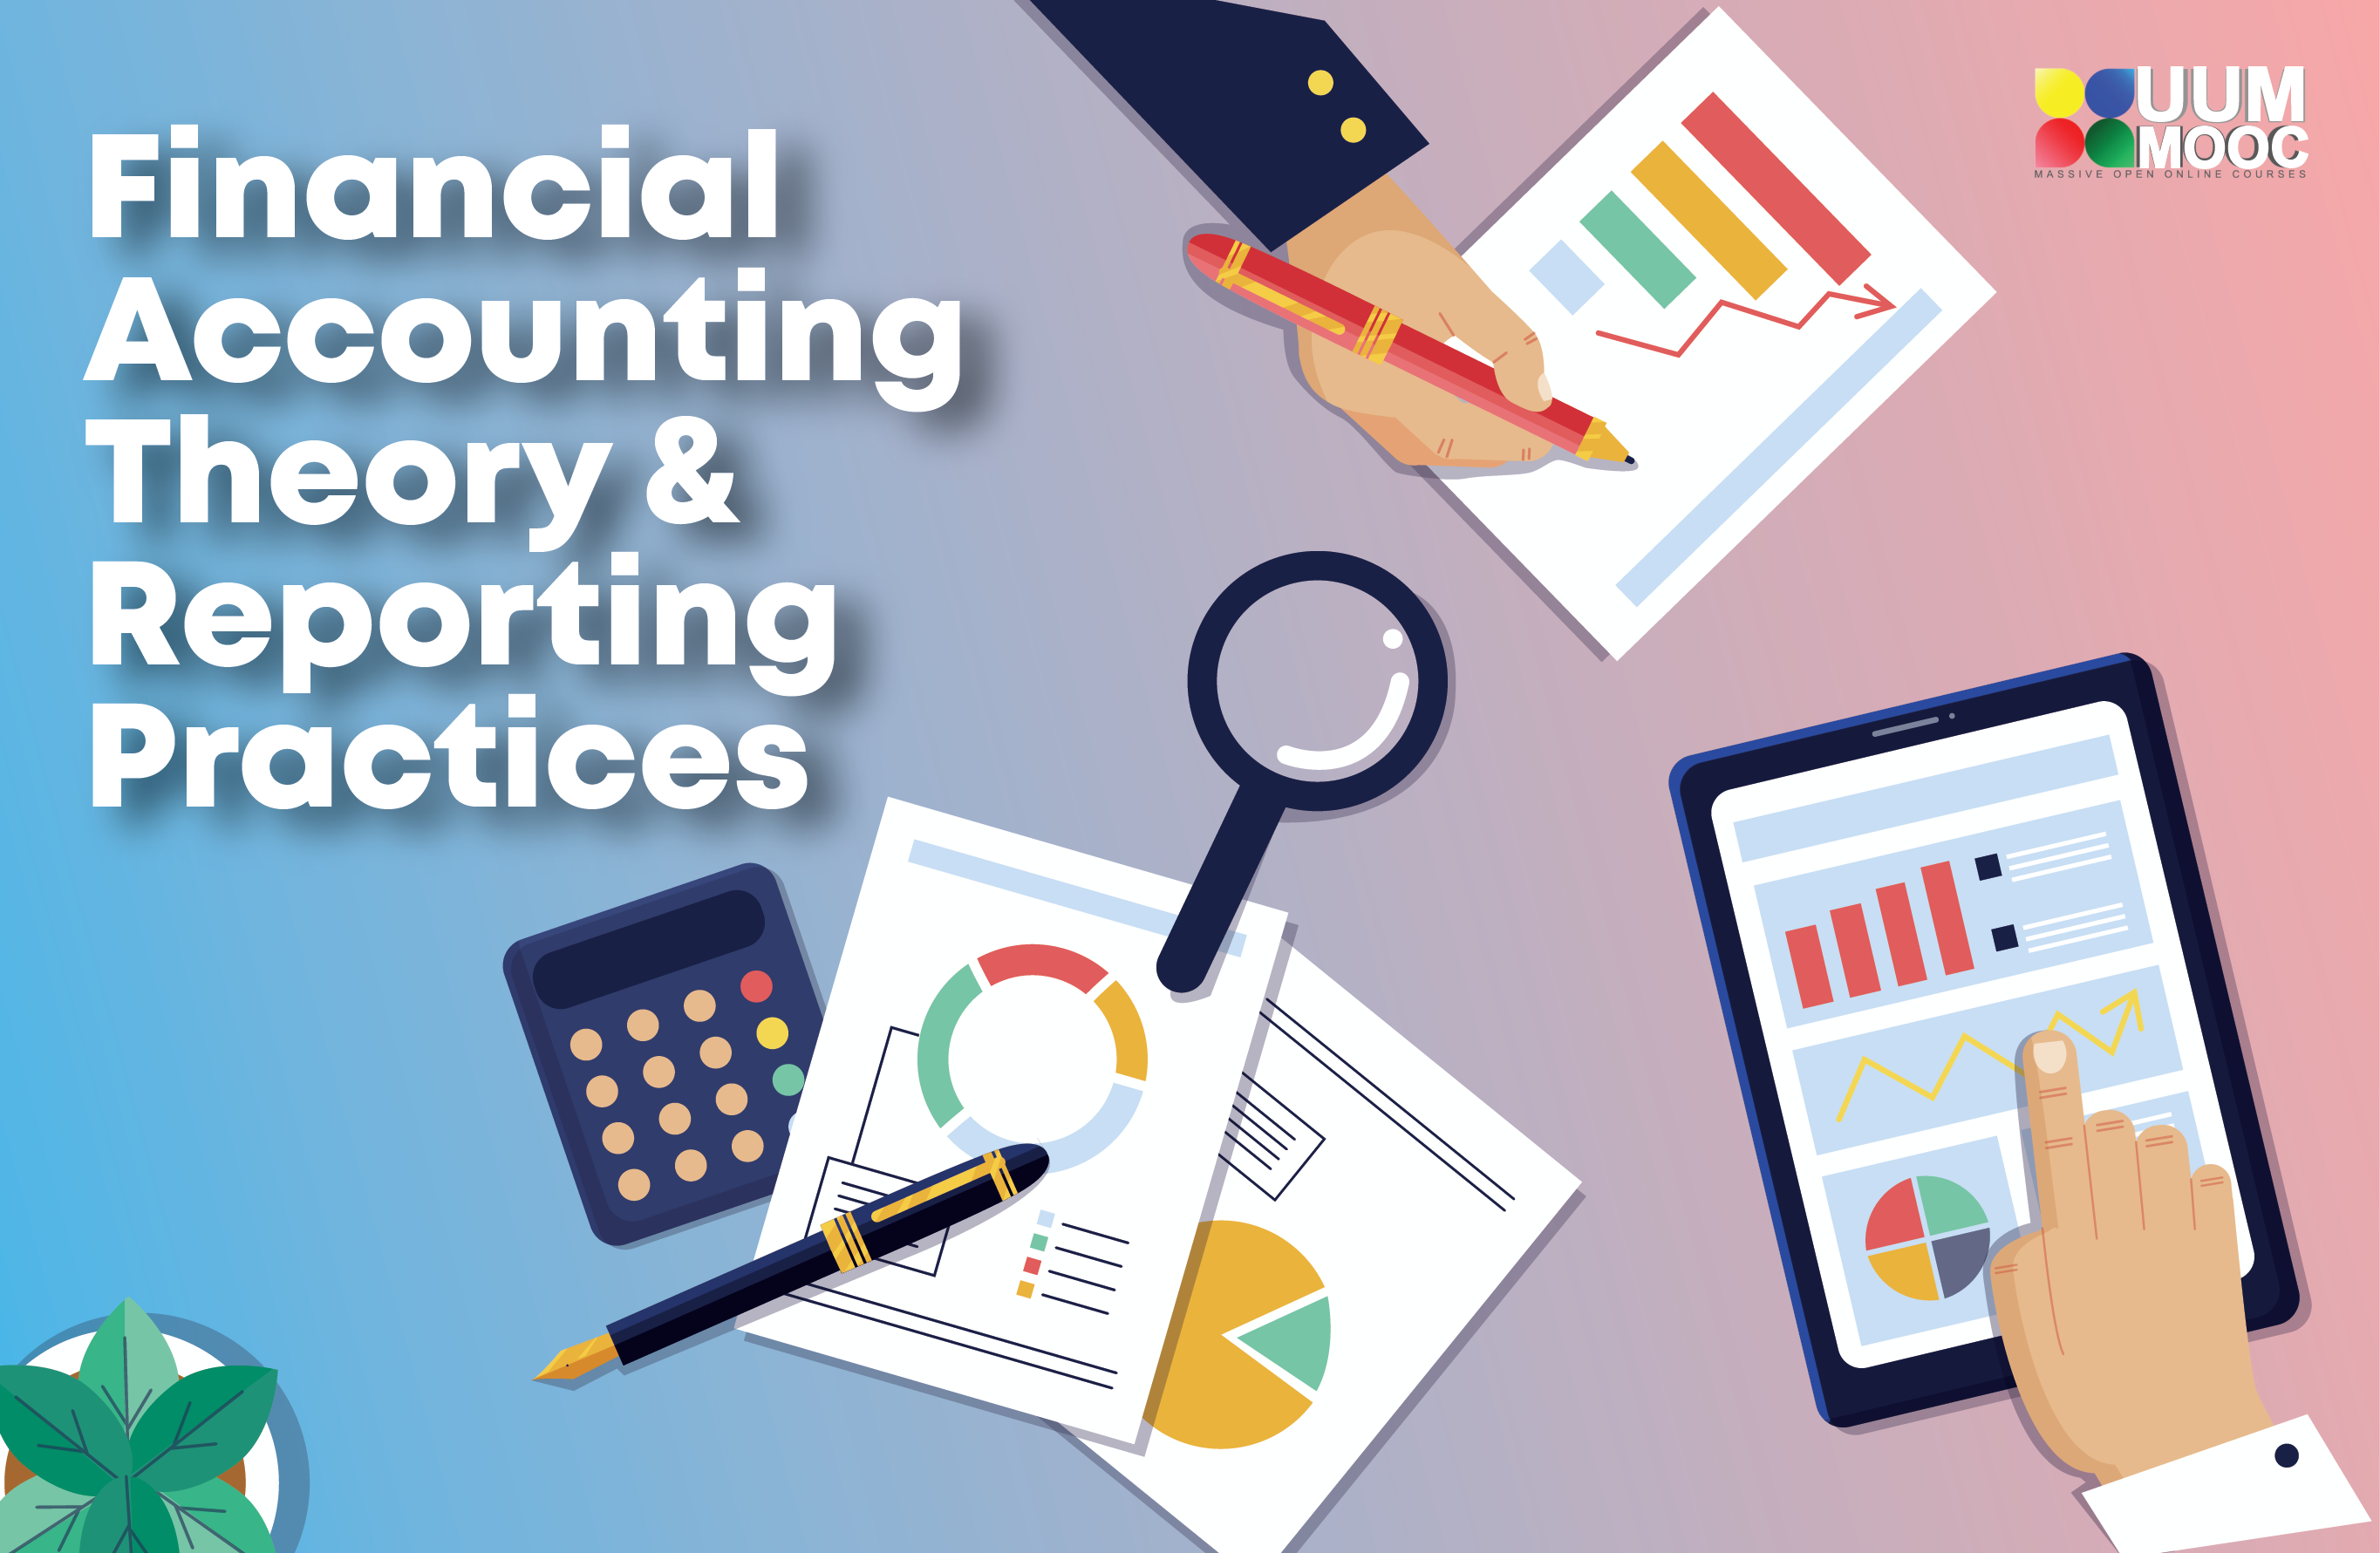 BKAF5043 Financial Accounting Theory & Reporting Practices 